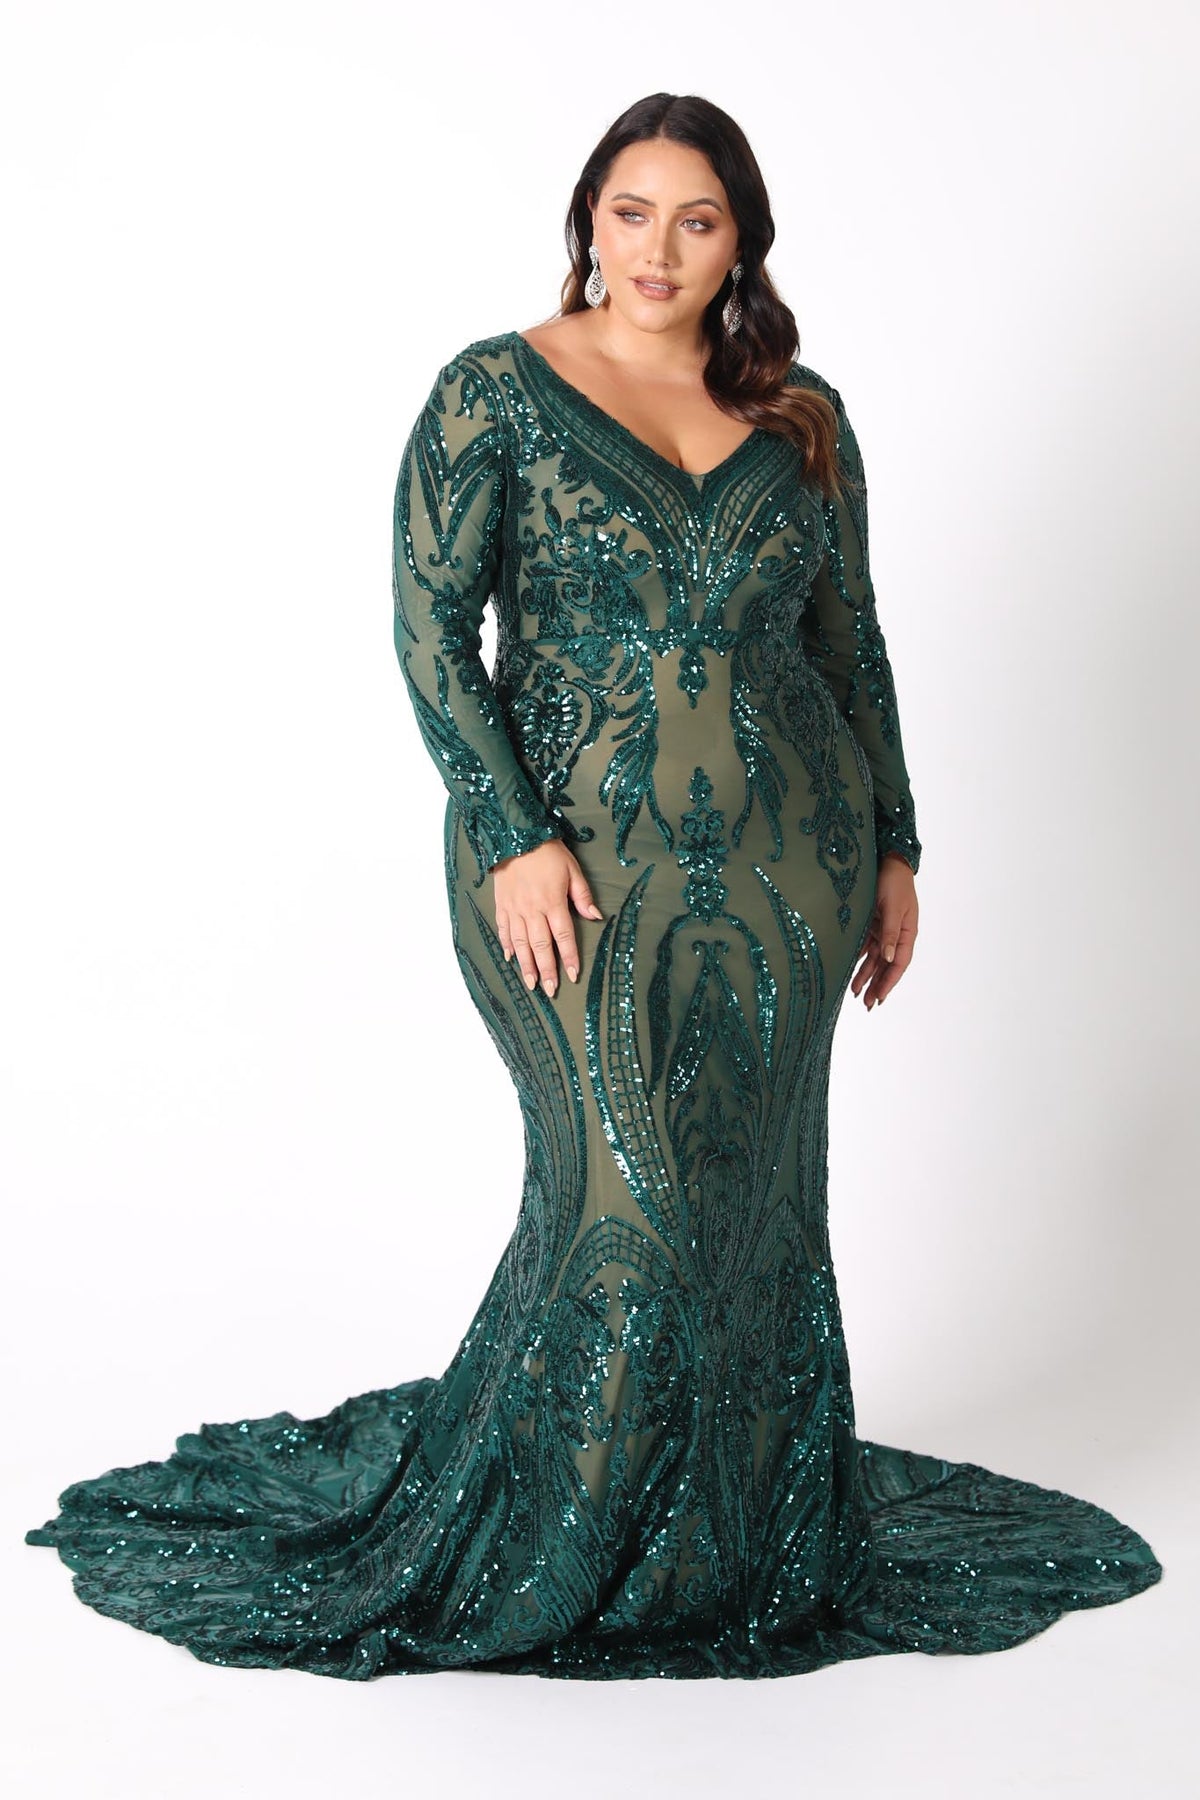 Plus Size V-Neck Long Sleeve Fitted Evening Sequin Gown in Embroidered Emerald Green Sequins over Neutral Underlay